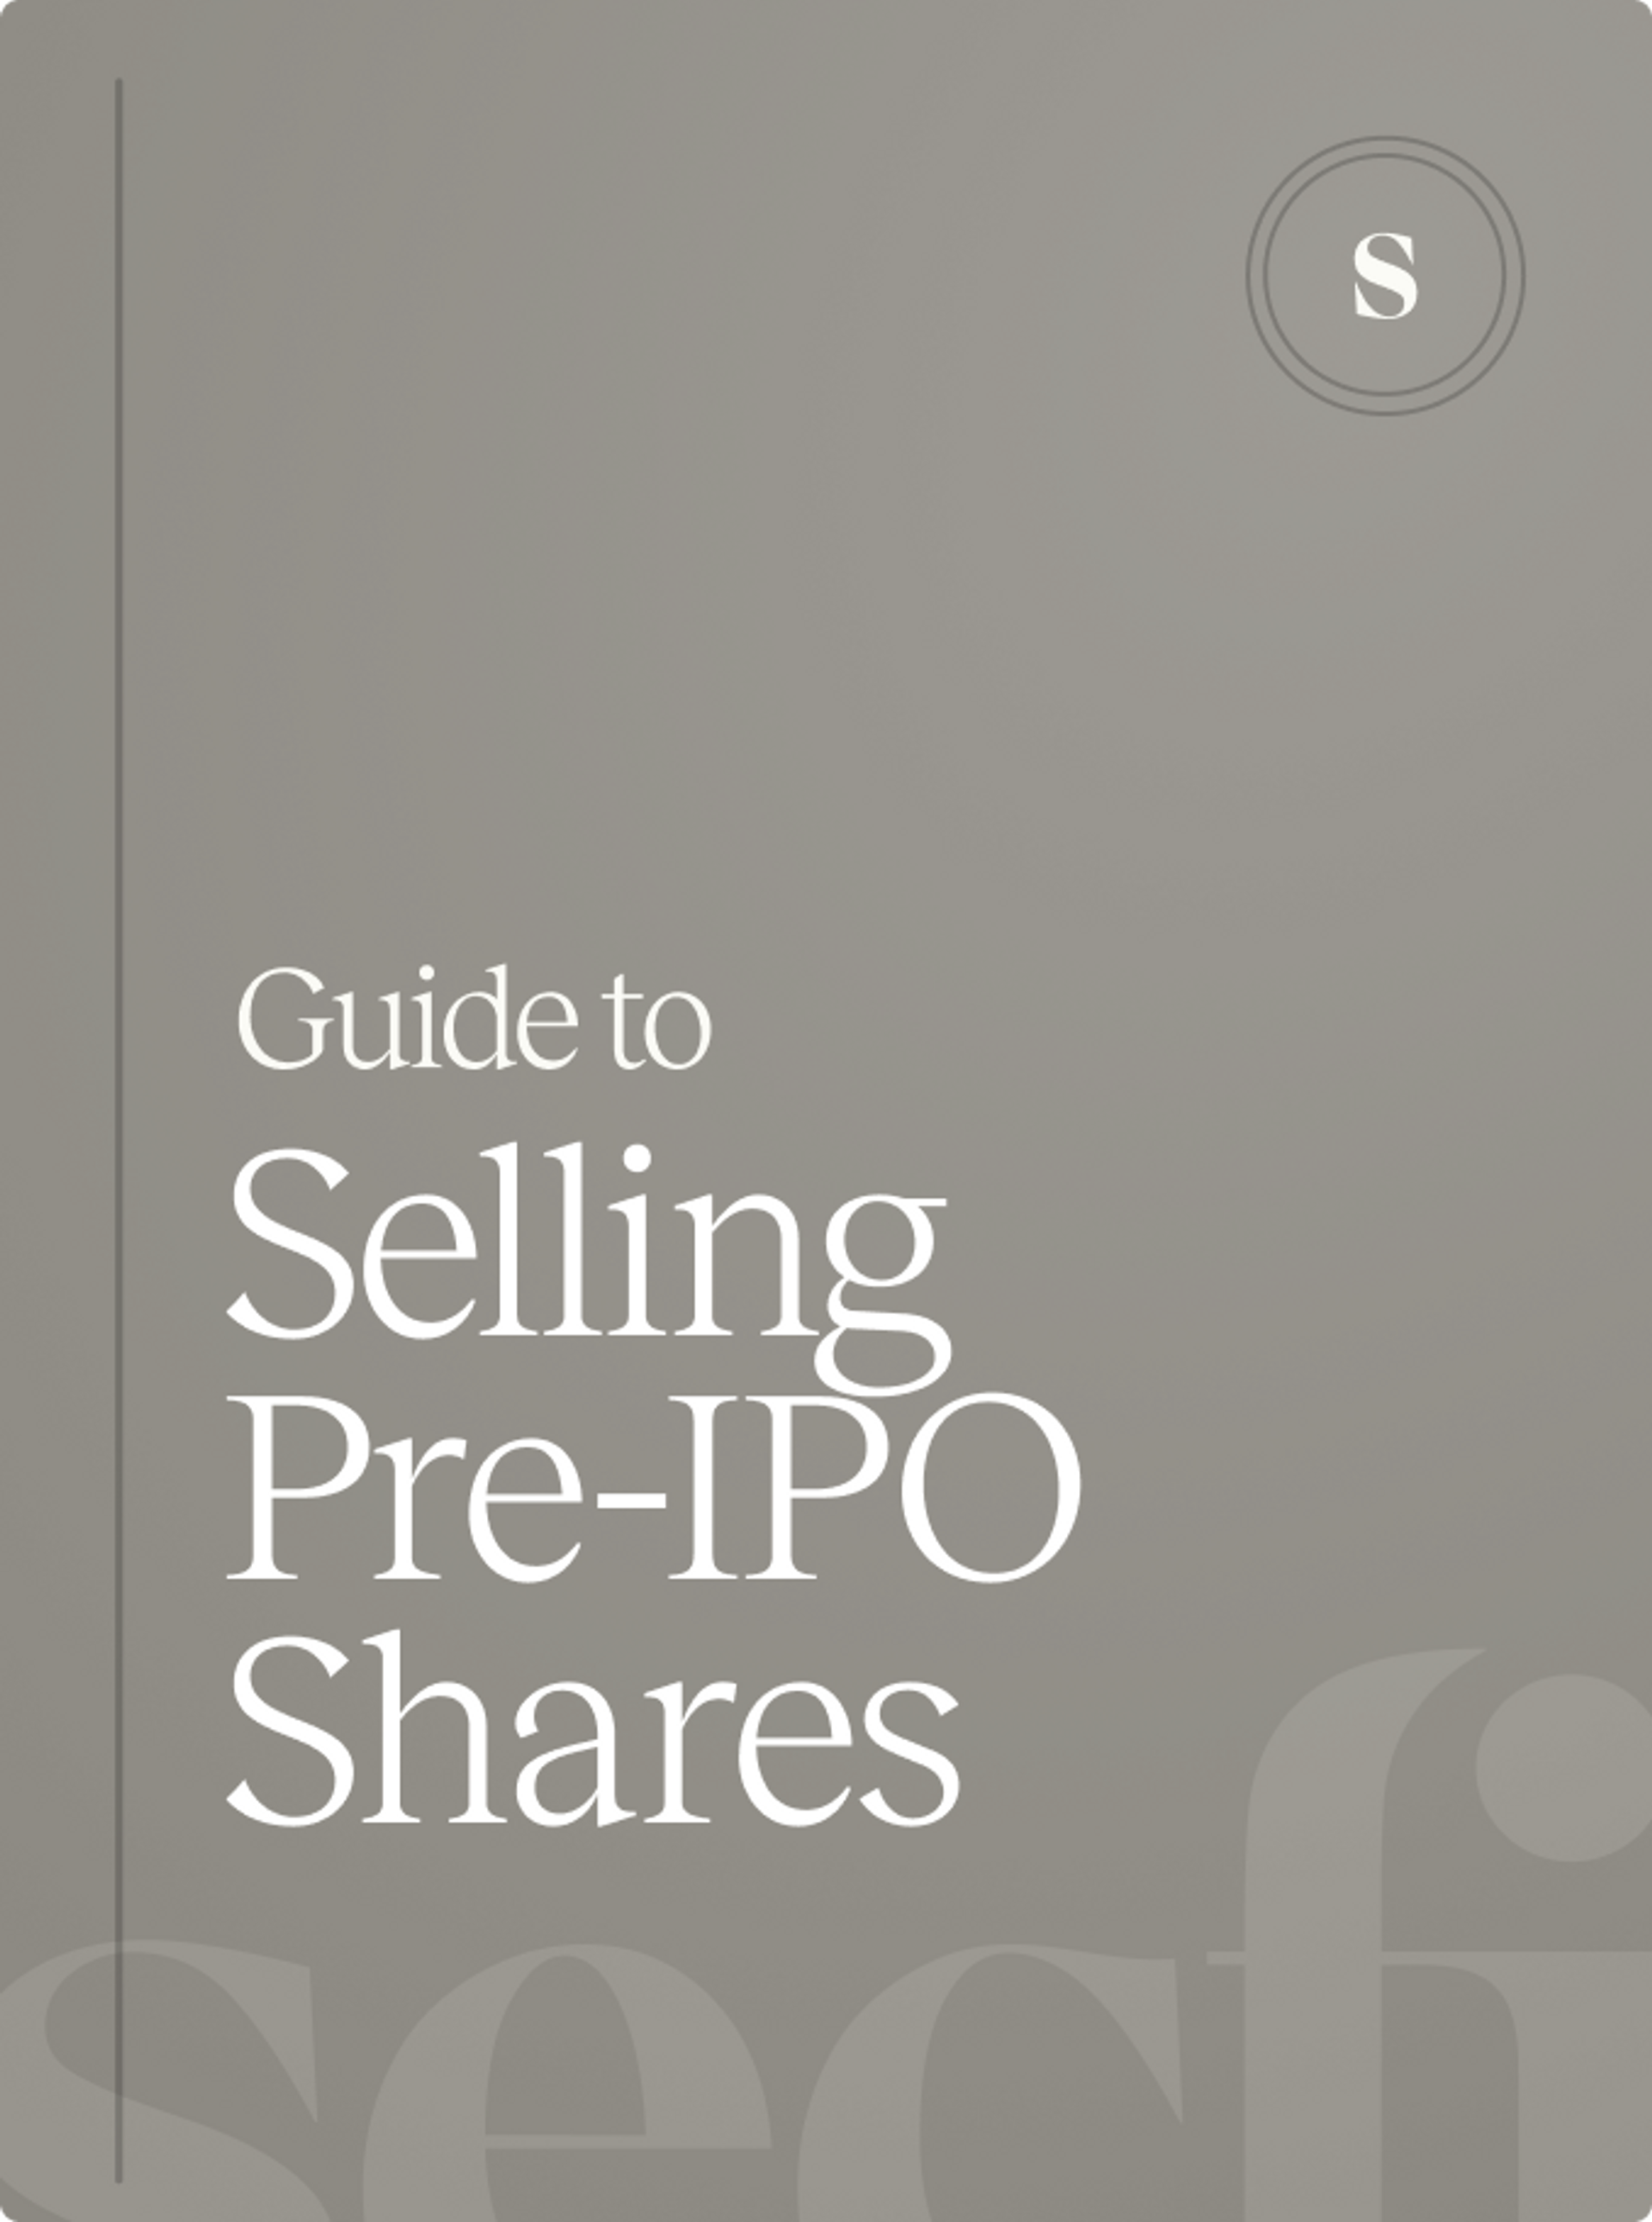 Selling pre-ipo shares guide cover